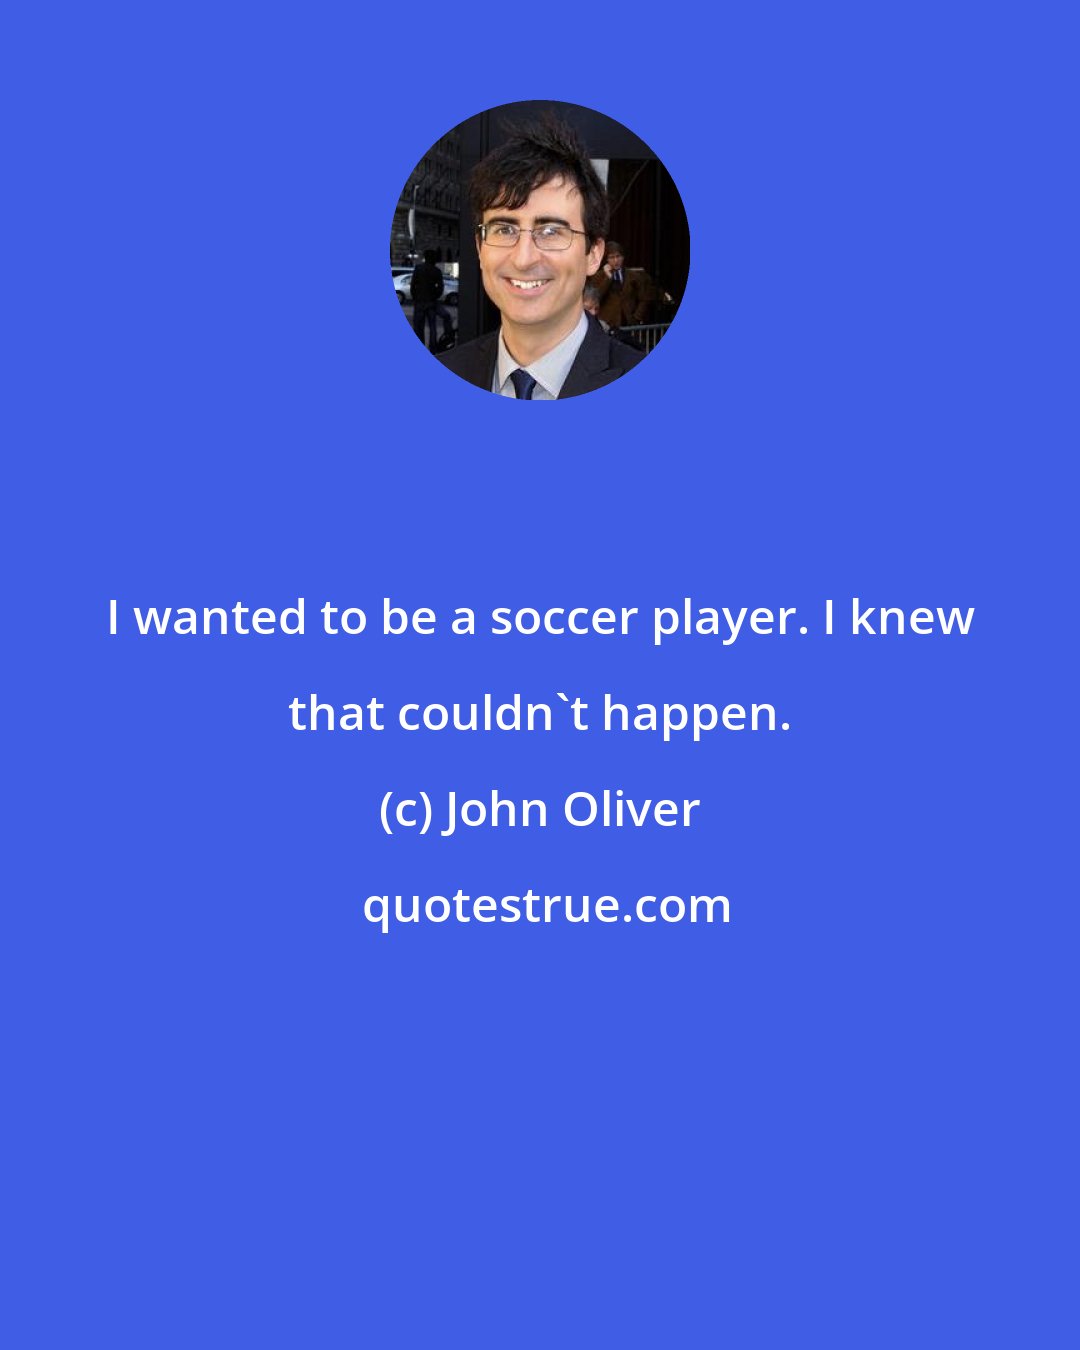 John Oliver: I wanted to be a soccer player. I knew that couldn't happen.